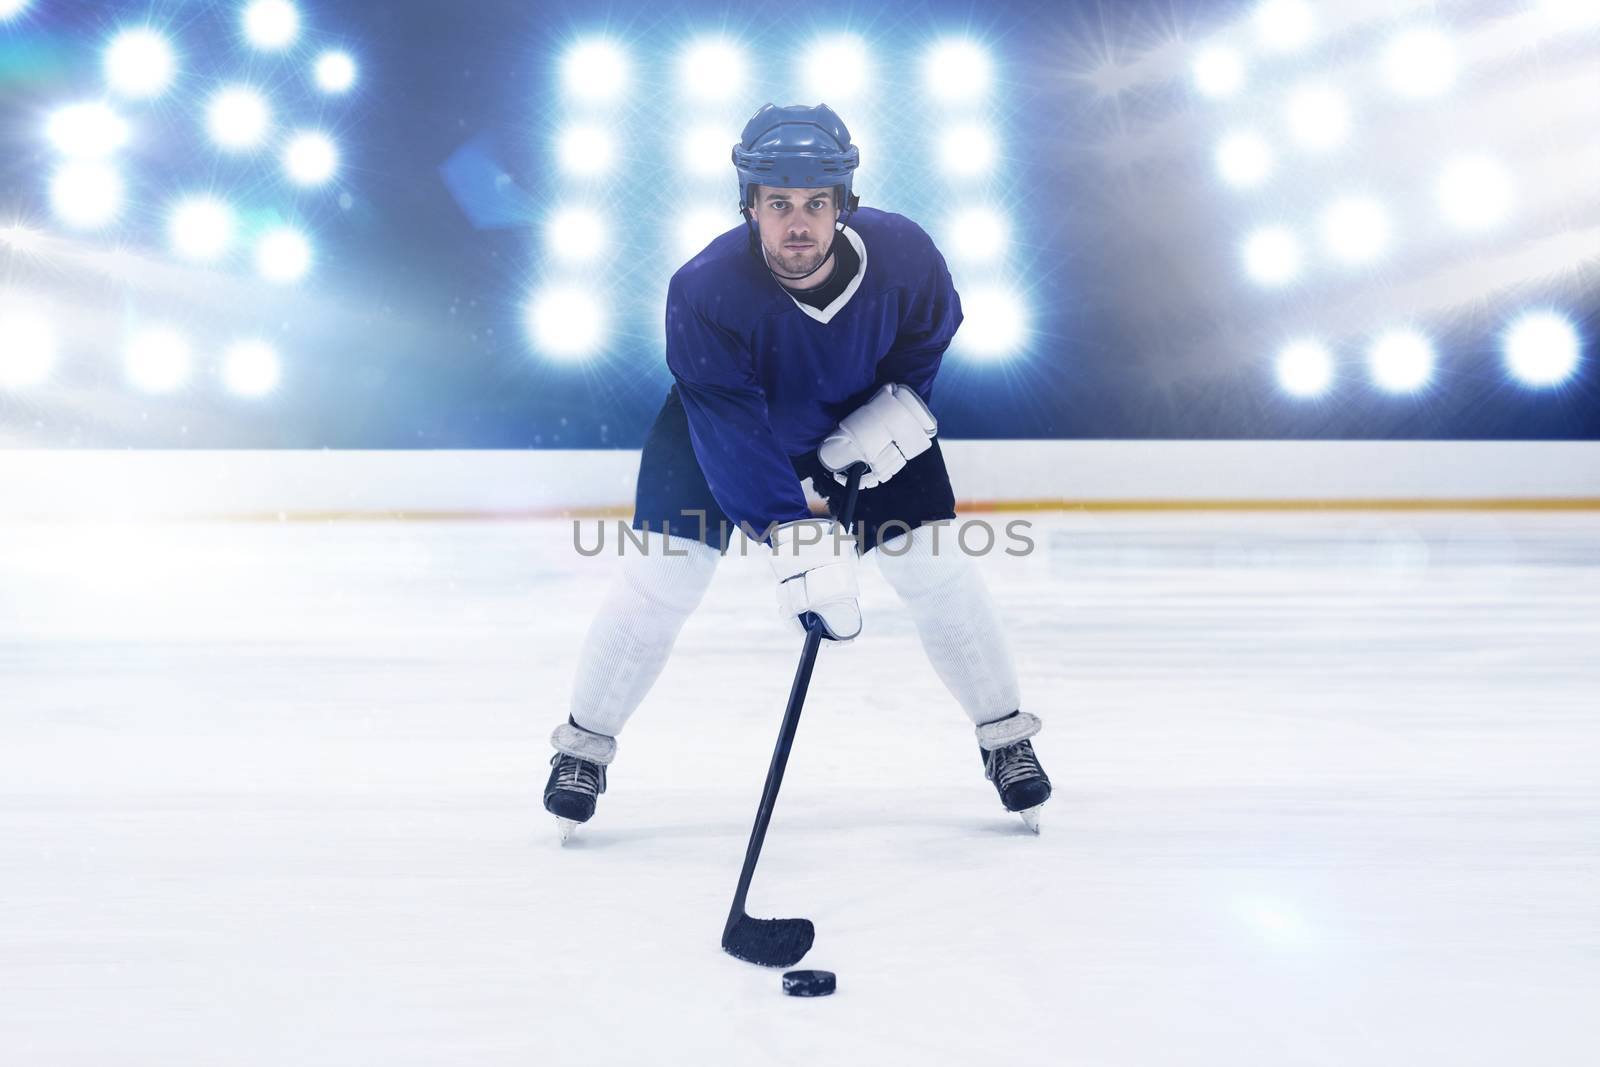 Composite image of player playing ice hockey by Wavebreakmedia